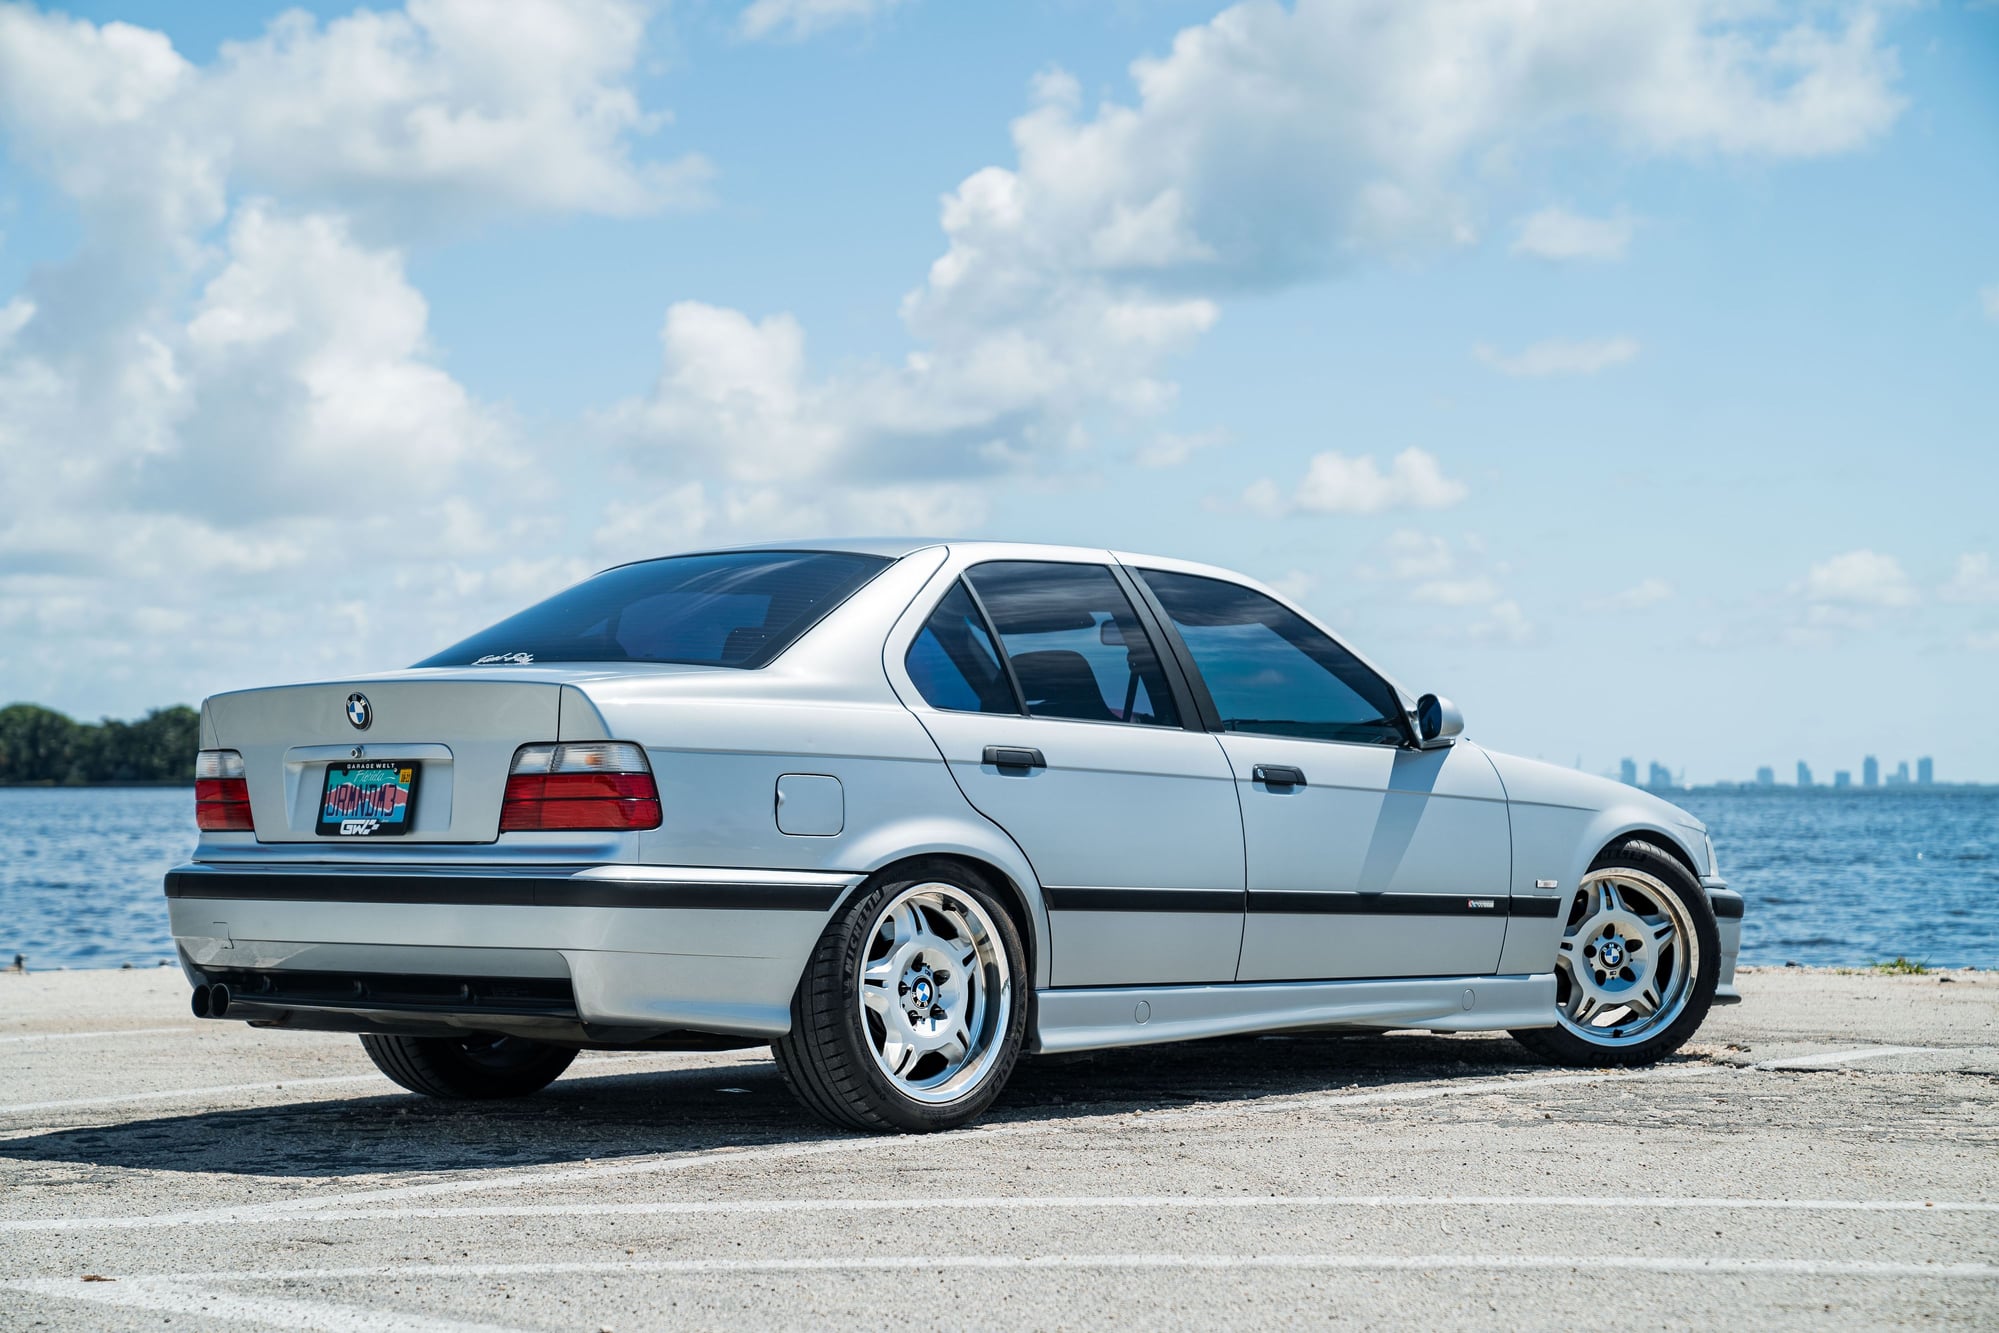 1997 BMW M3 - 1997 Dinan Stage 3 Supercharged M3 Sedan #'s matching - Used - VIN WBSCD9324VEE05383 - 112,250 Miles - 6 cyl - 2WD - Manual - Sedan - Silver - Miami, FL 33178, United States